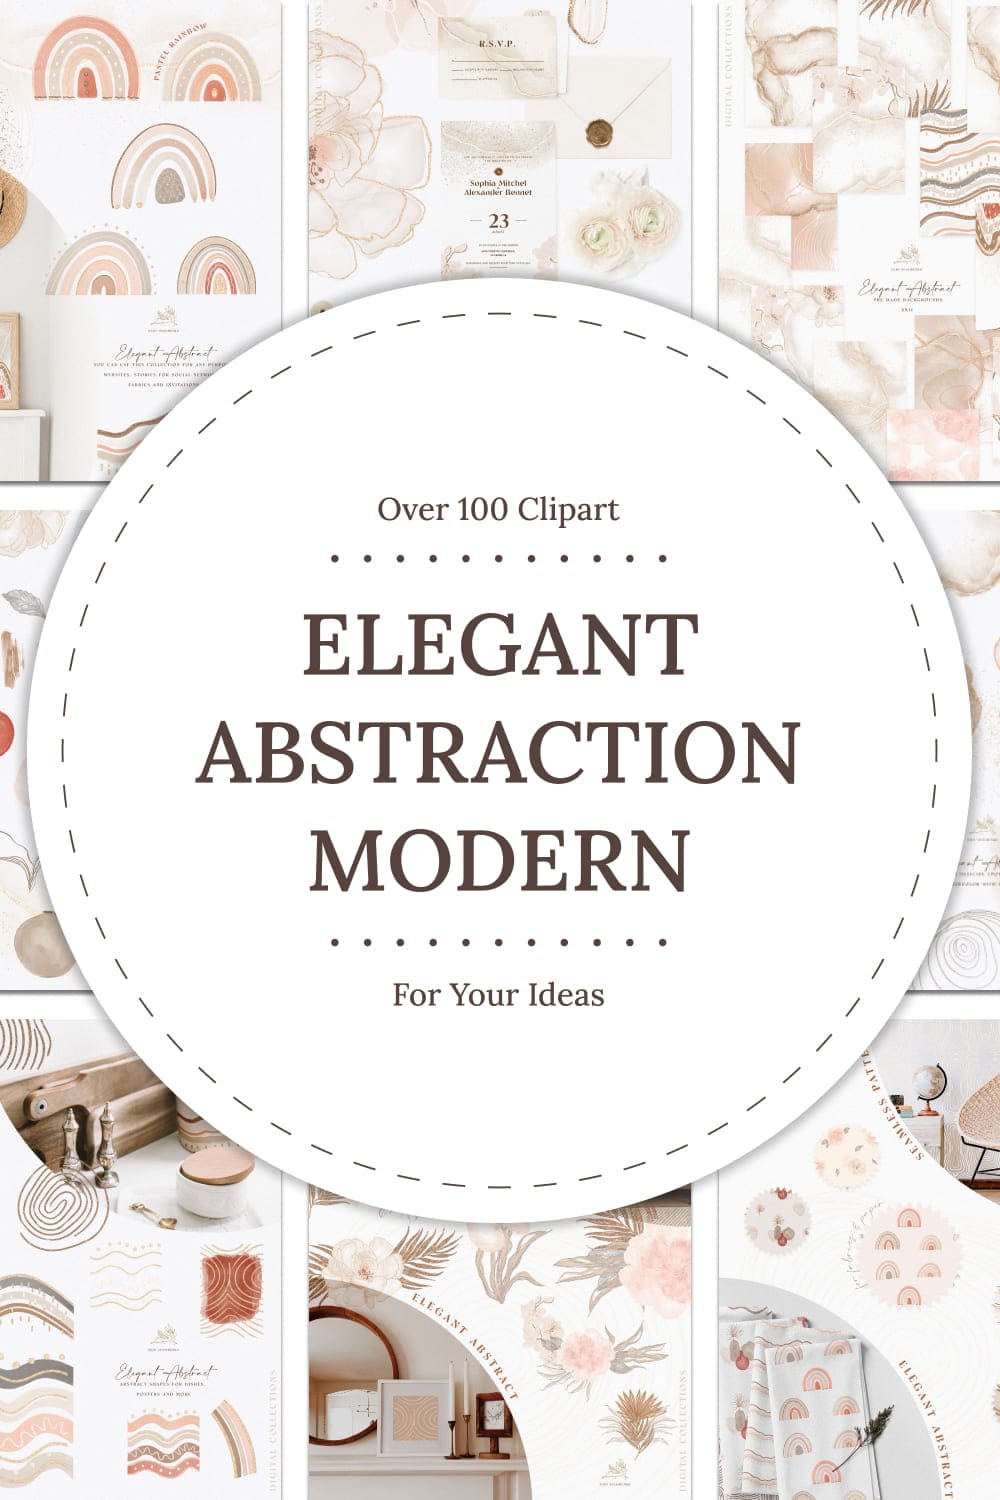 Elegant abstraction modern, picture for pinterest 1000x1500.